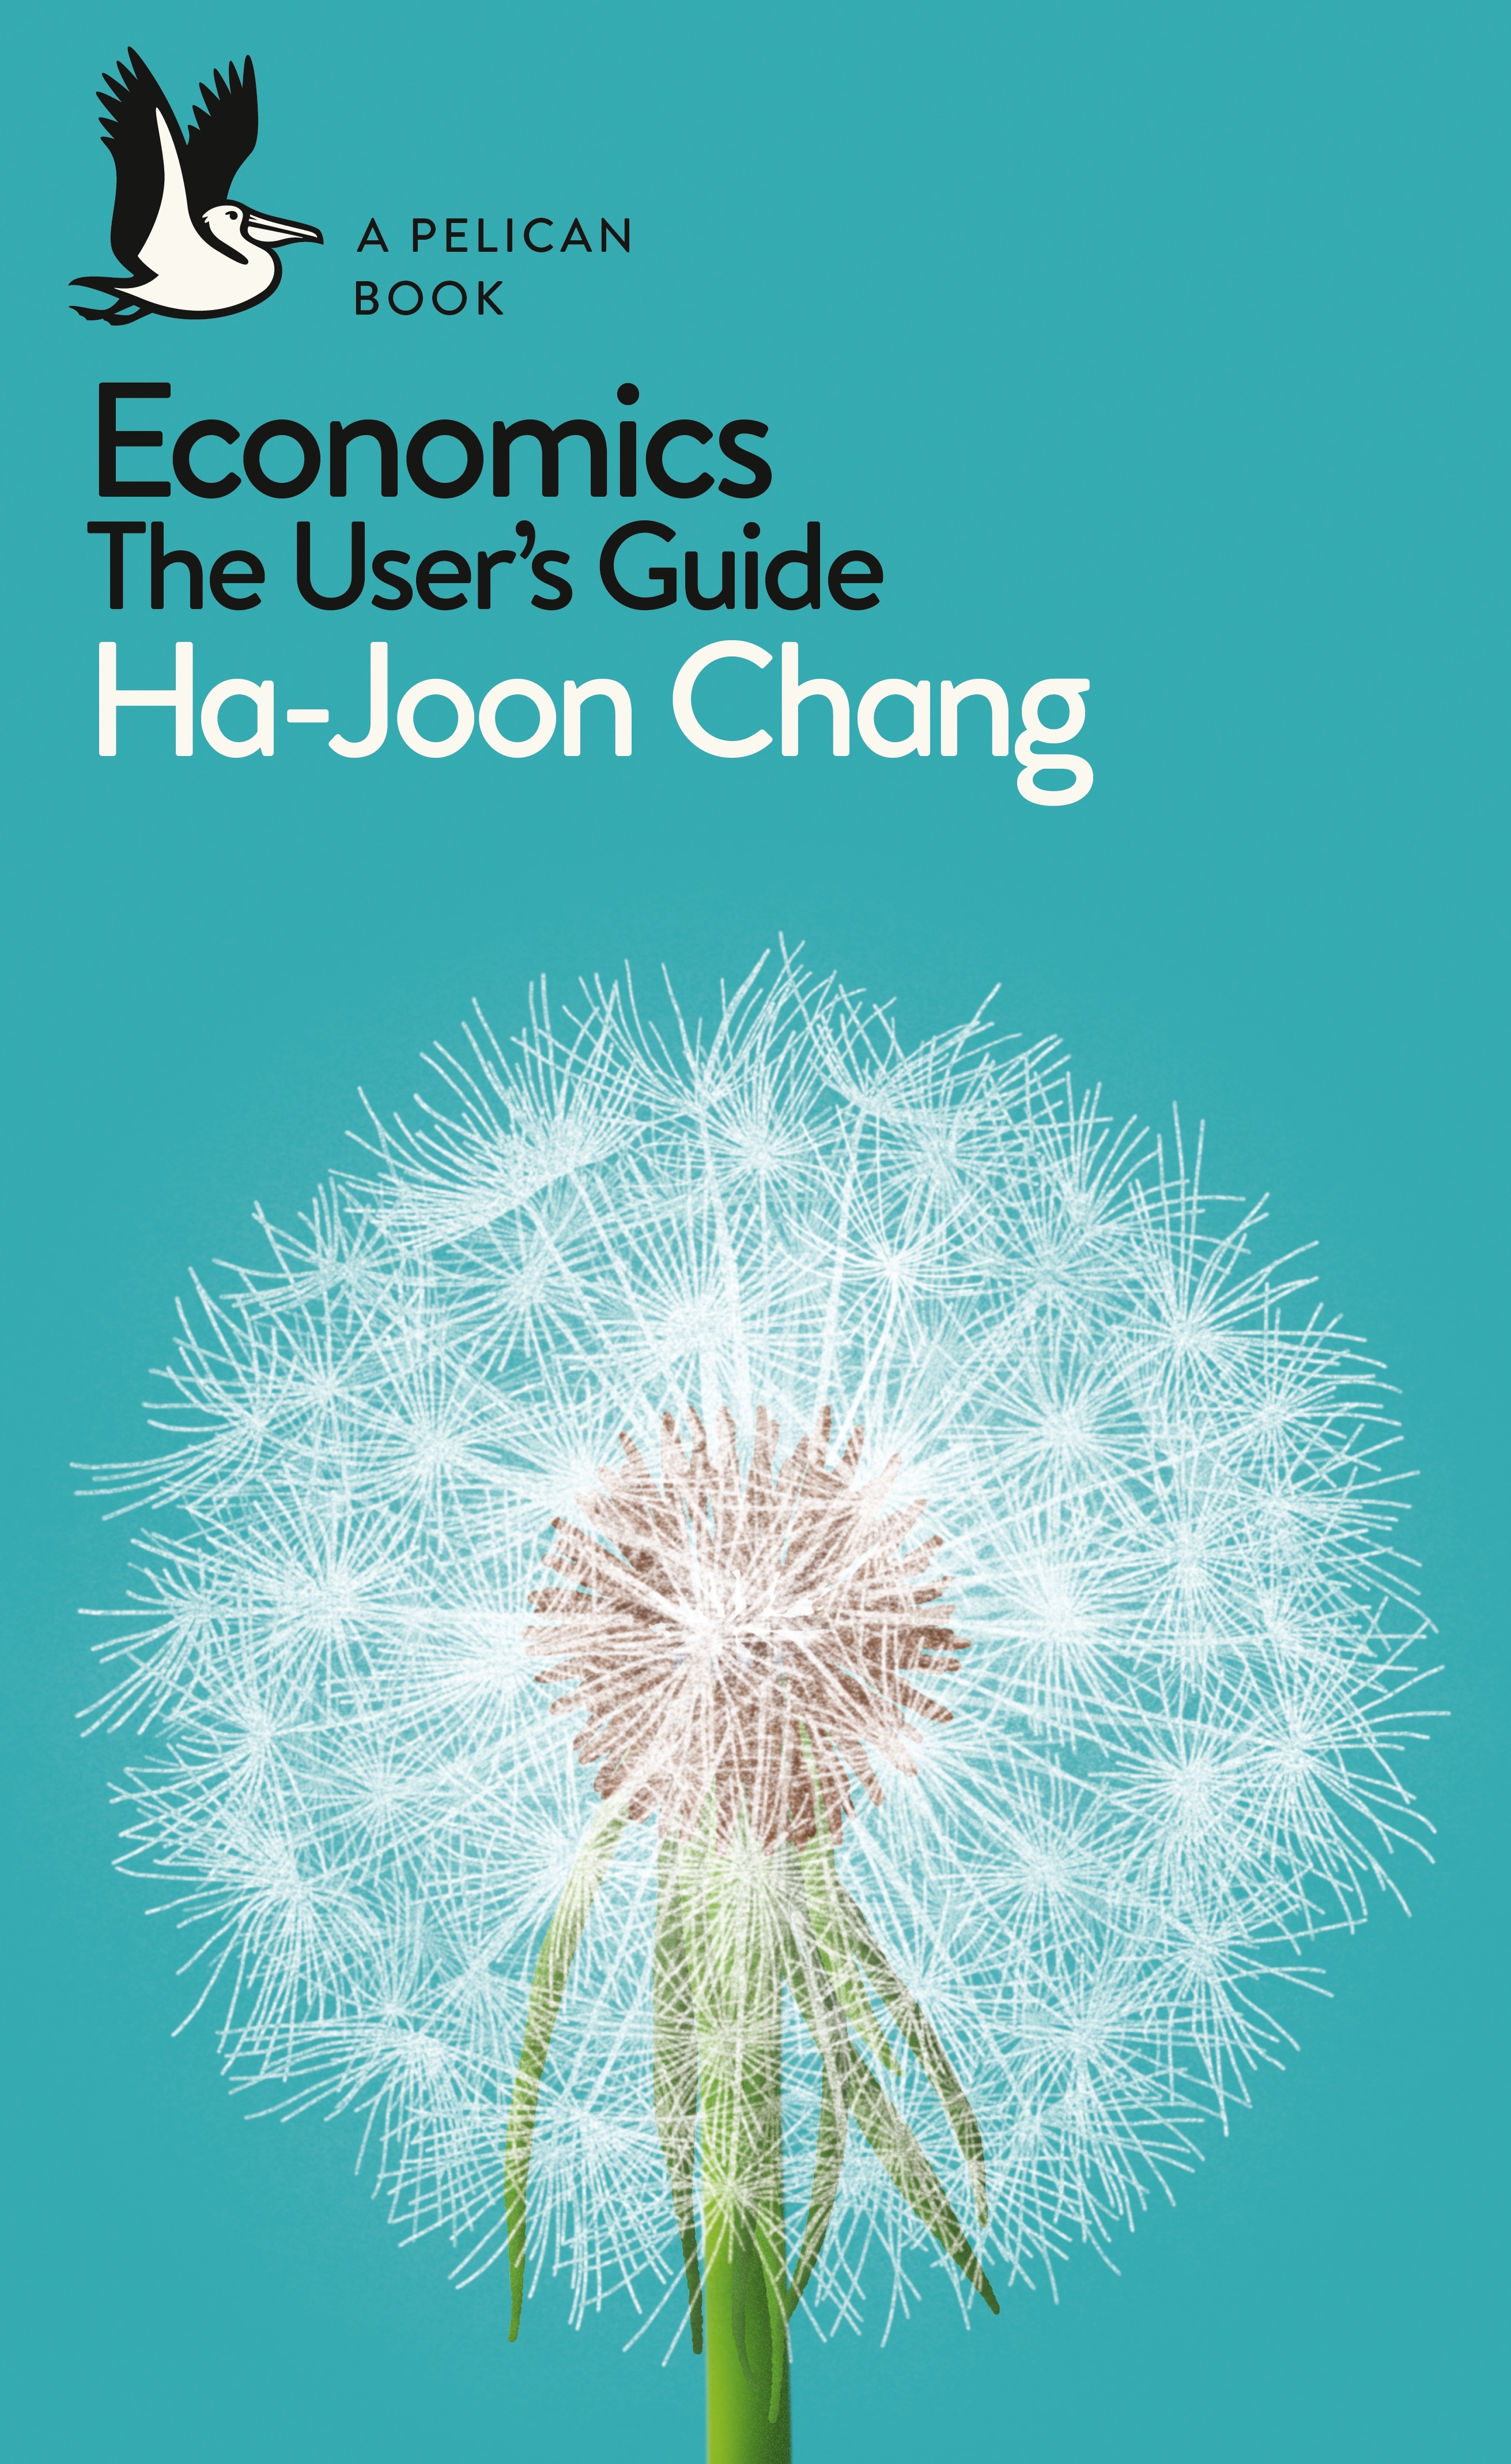 Book “Economics: The User's Guide” by Ha-Joon Chang — May 1, 2014